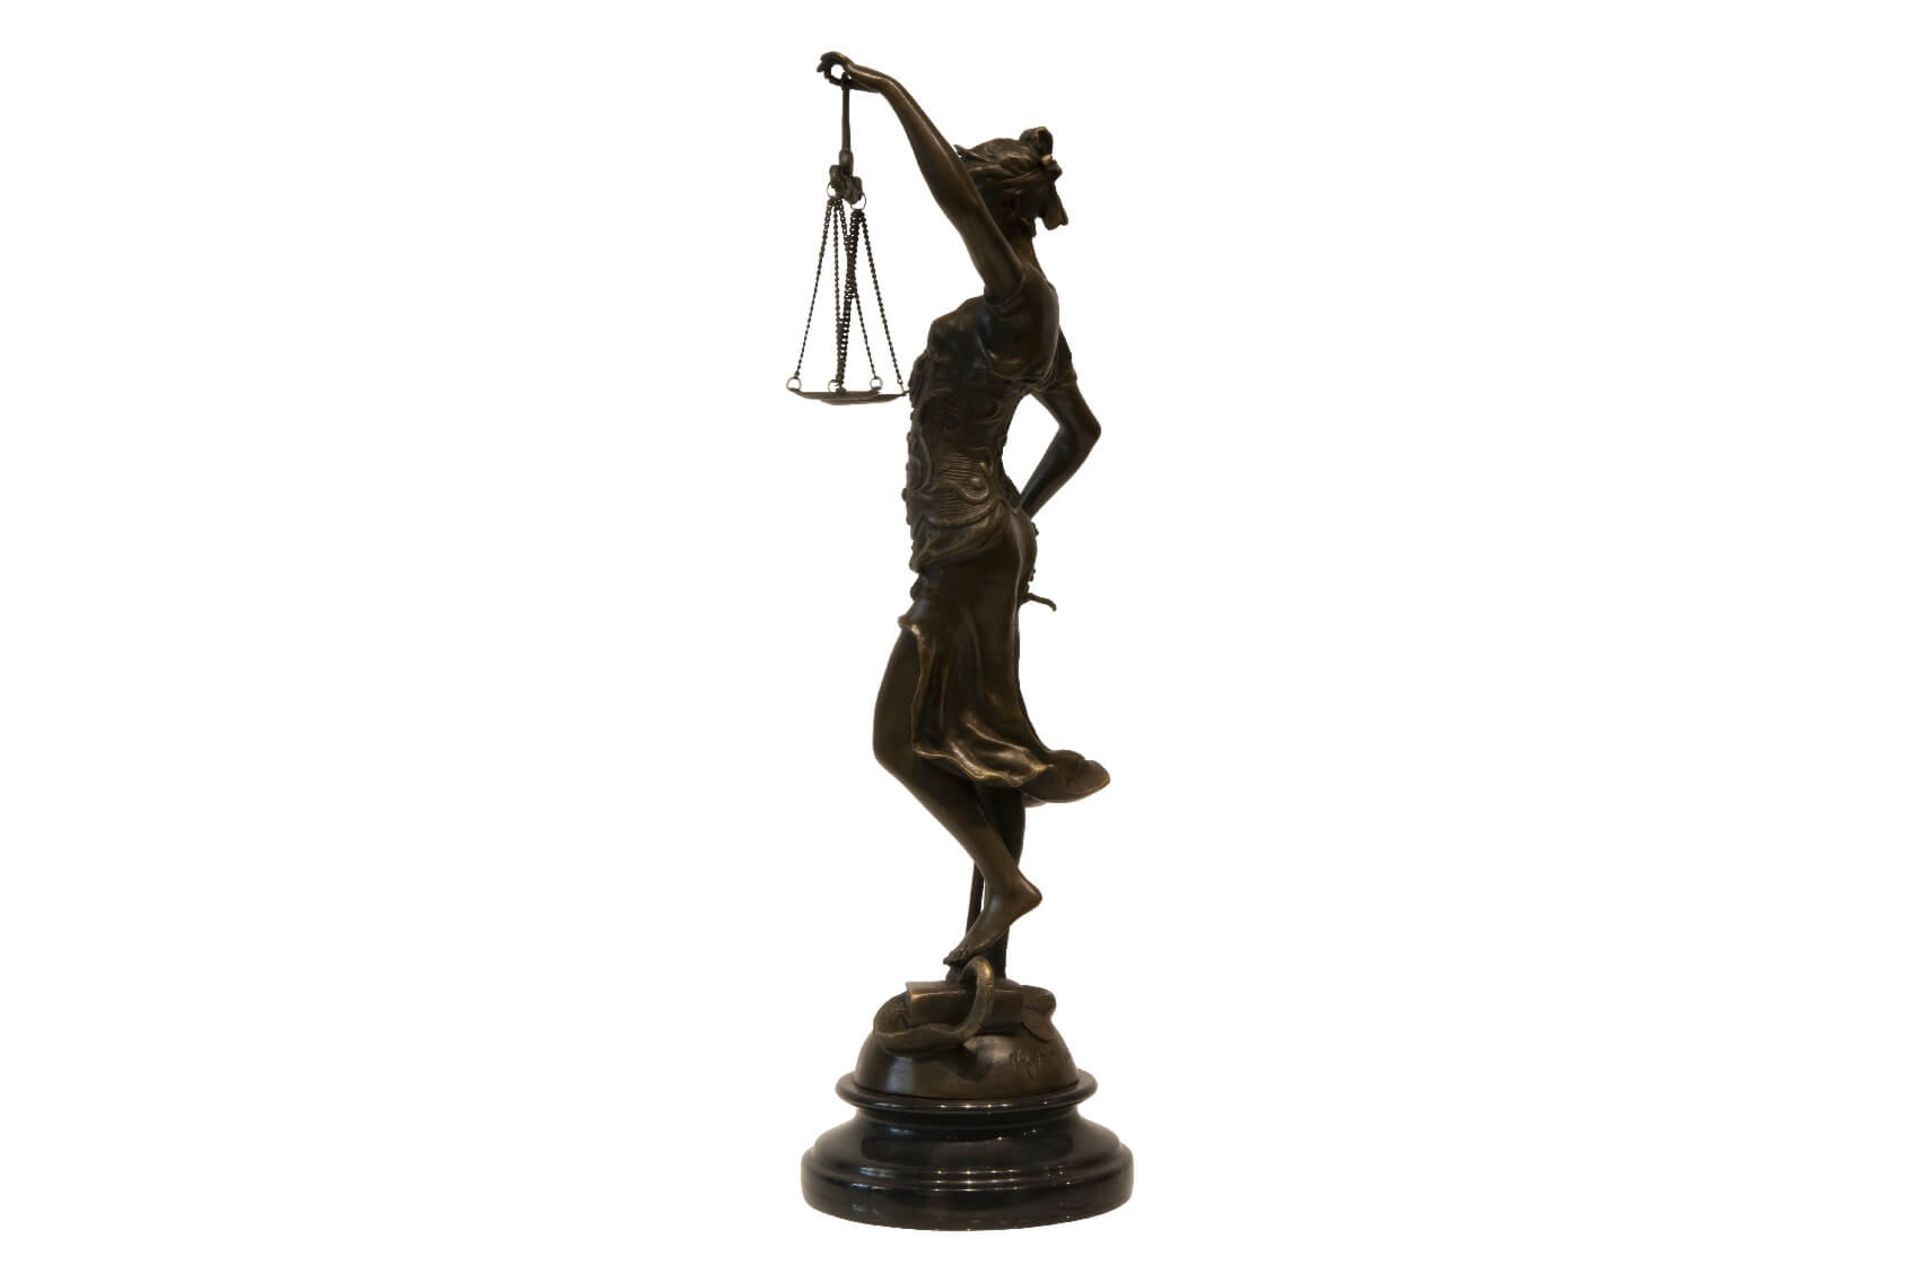 Alois Mayer 1855-1936, Reproduktion Justicia | Alois Mayer 1855-1936, Lady Justice Reproduction - Image 2 of 5